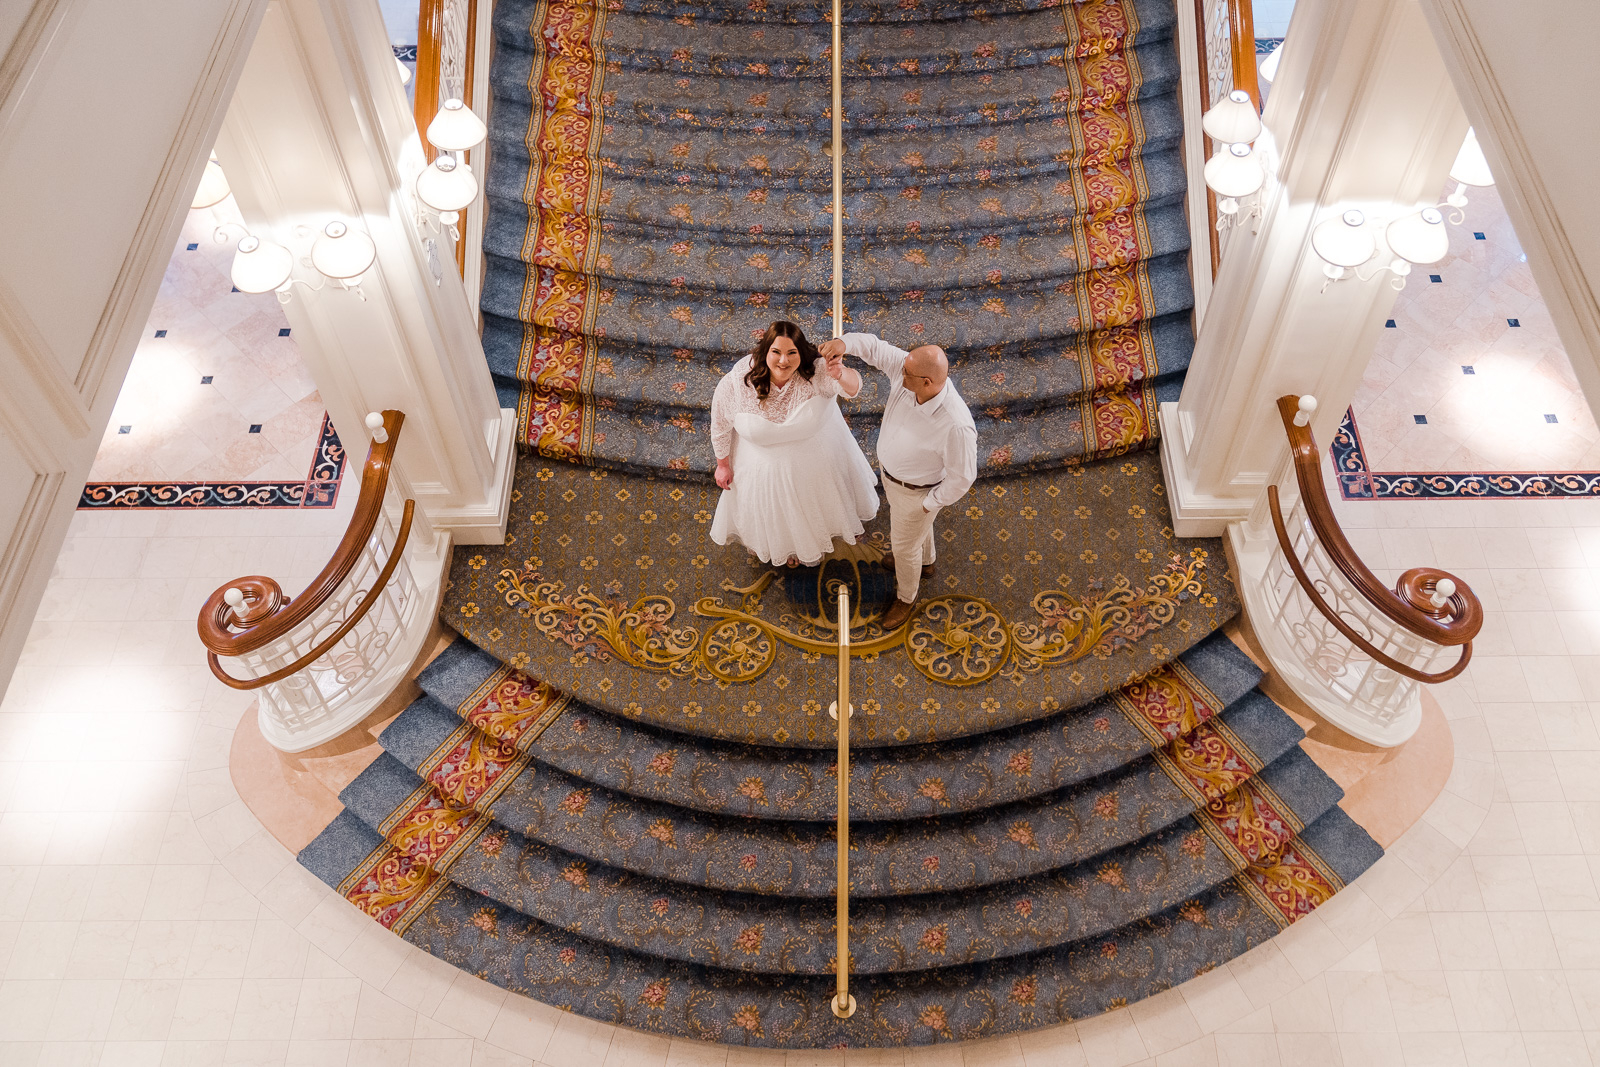 Engagement photography at staircase of Disney's Grand Floridian resort in Orlando